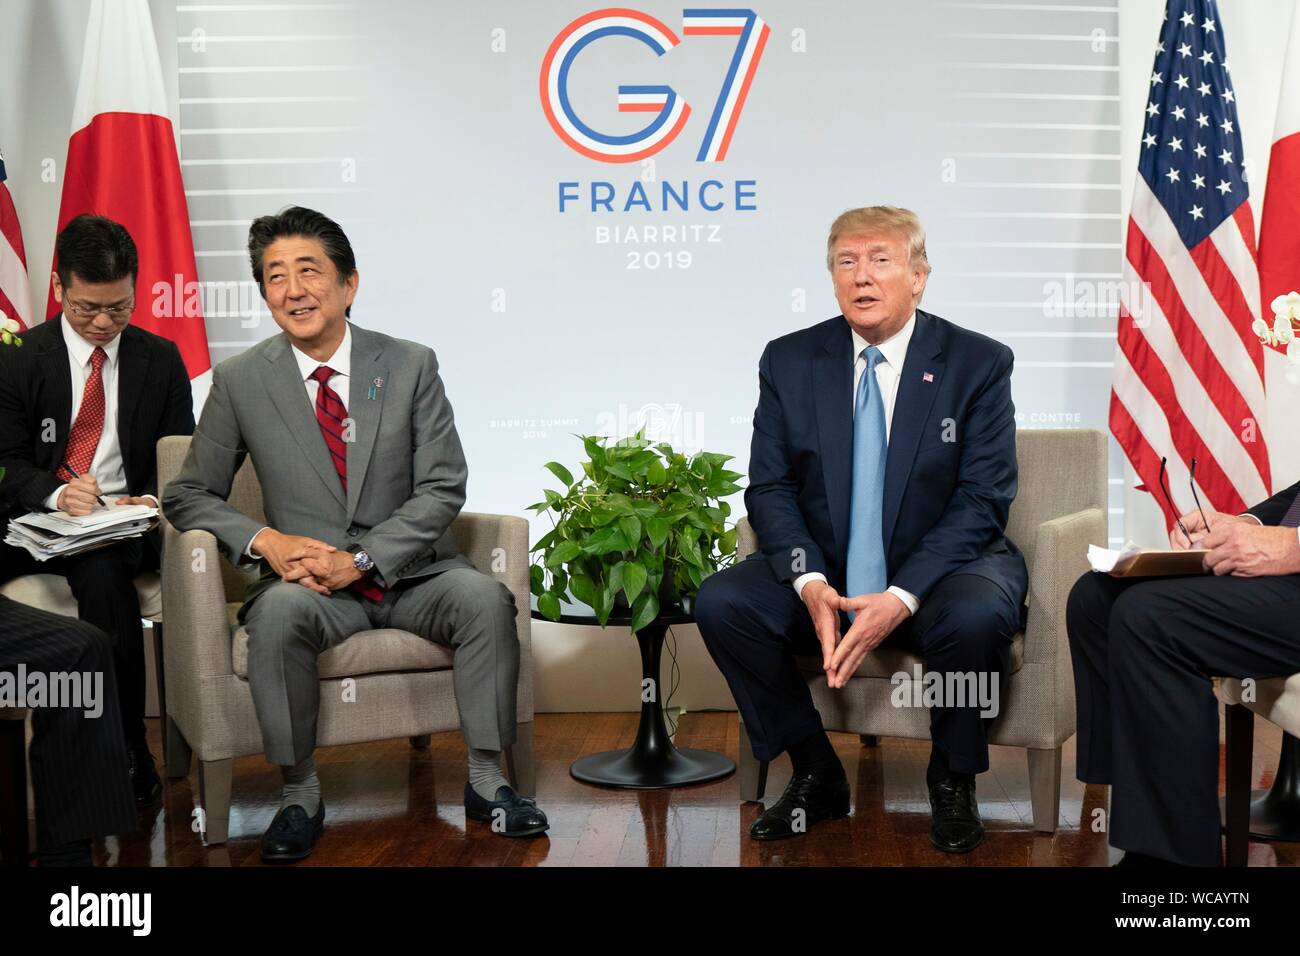 U.S. President Donald Trump with Japanese Prime Minister Shinzo Abe, left, prior to their trade meeting on the sidelines of the G7 Summit at the Centre de Congrés Bellevue August 25, 2019 in Biarritz, France. Stock Photo